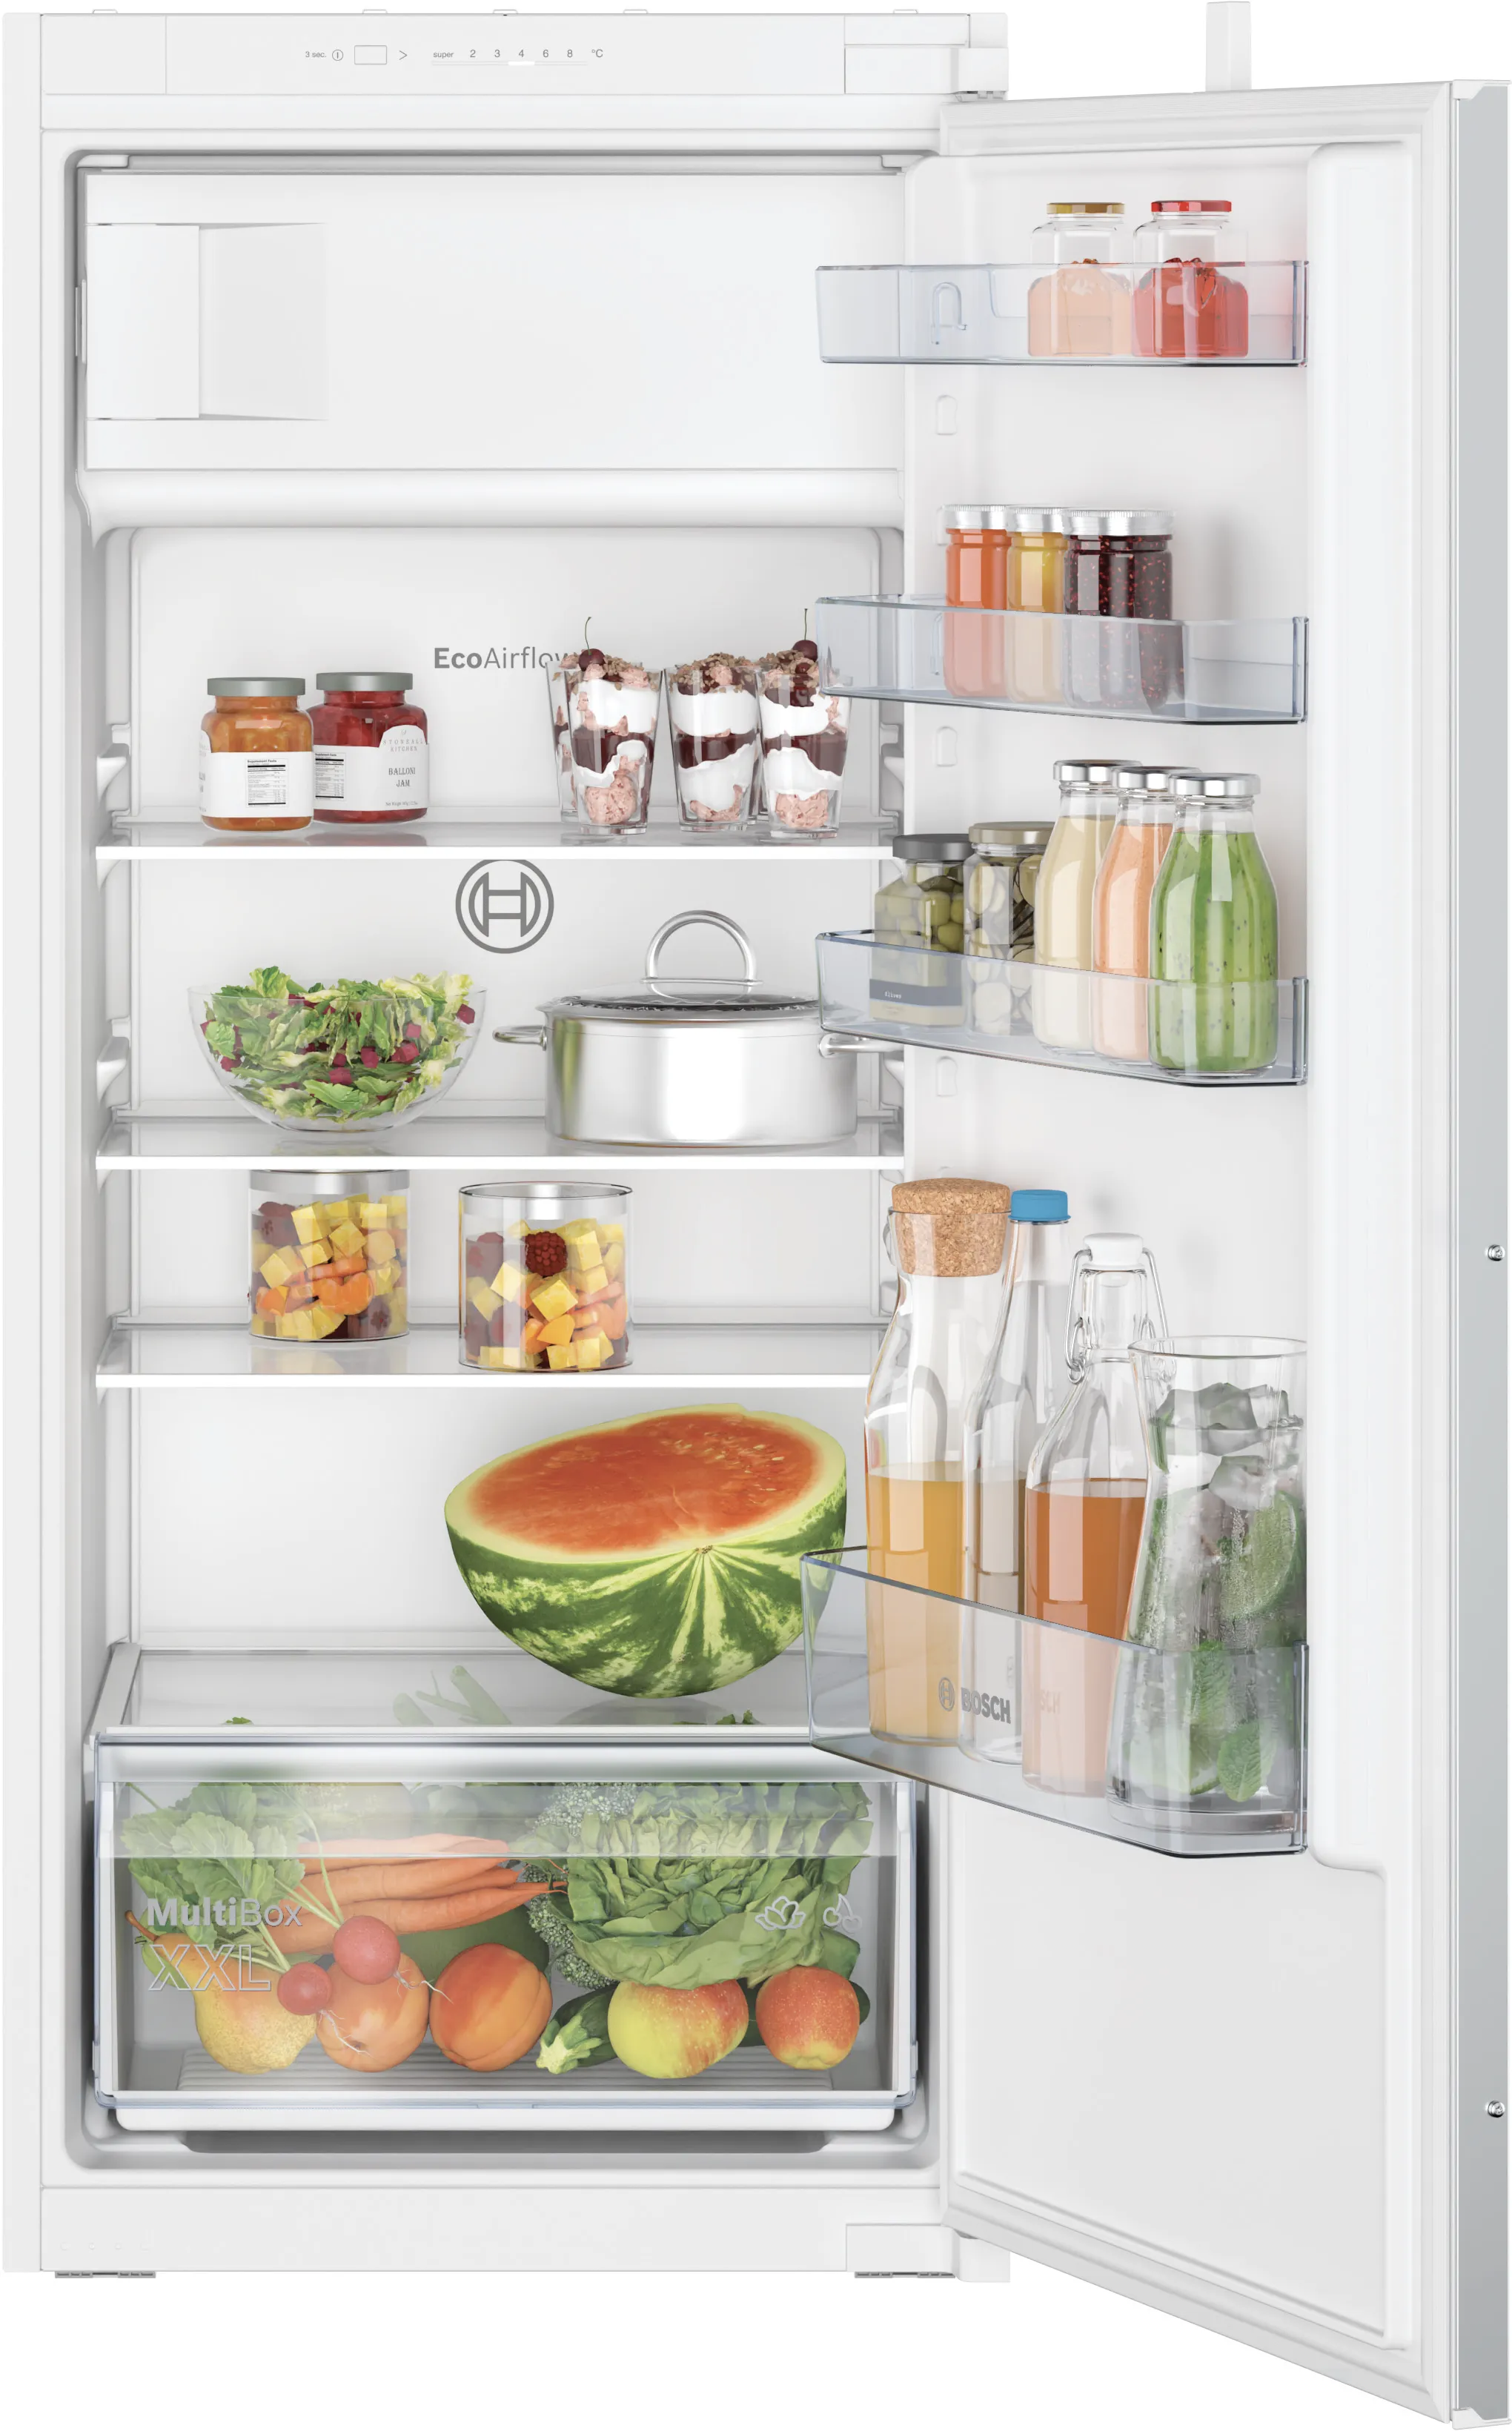 Built-in fridges with freezer section